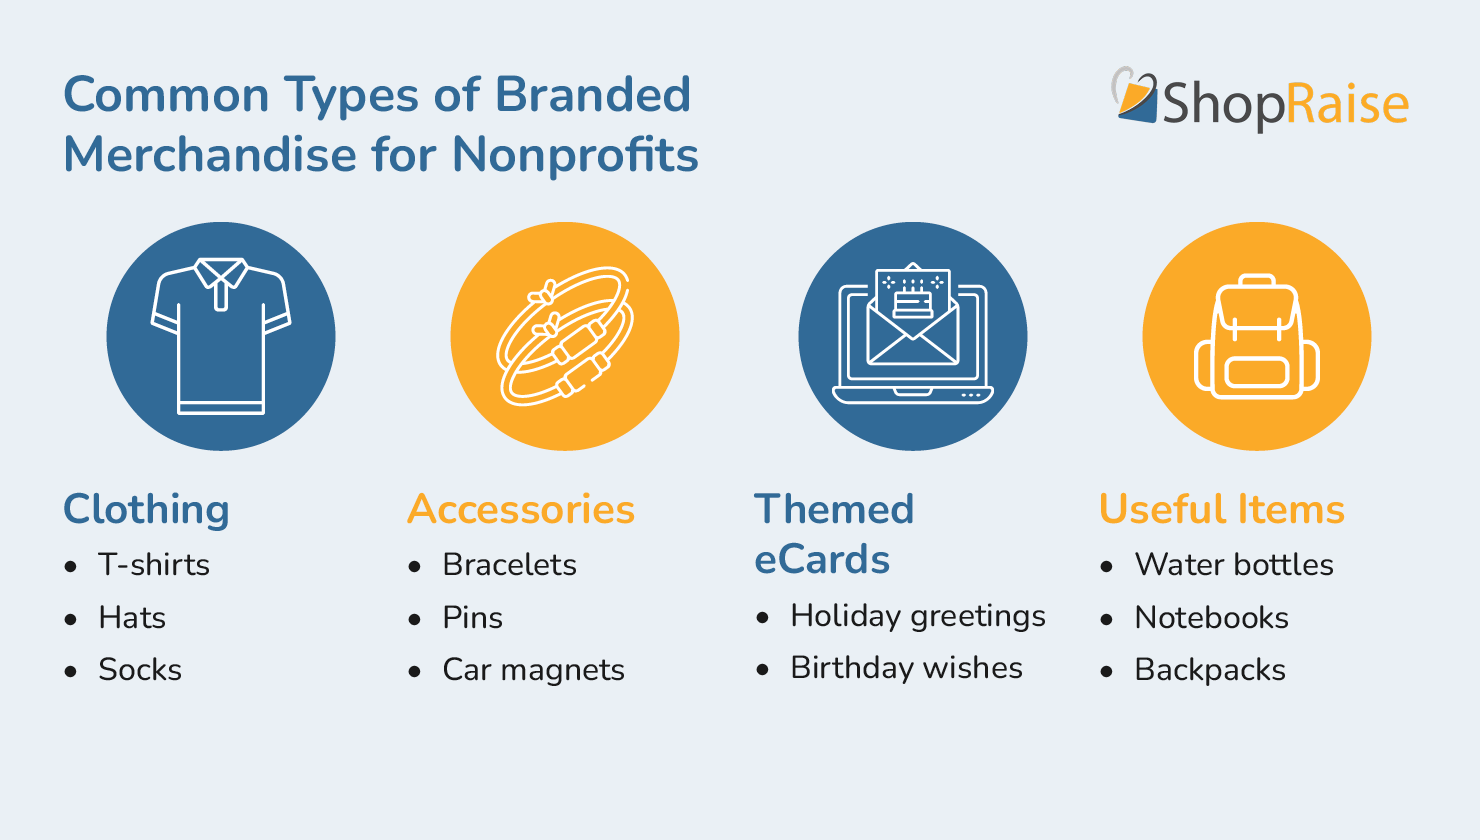 Common types of branded merchandise that you can purchase to support a cause, as listed below.